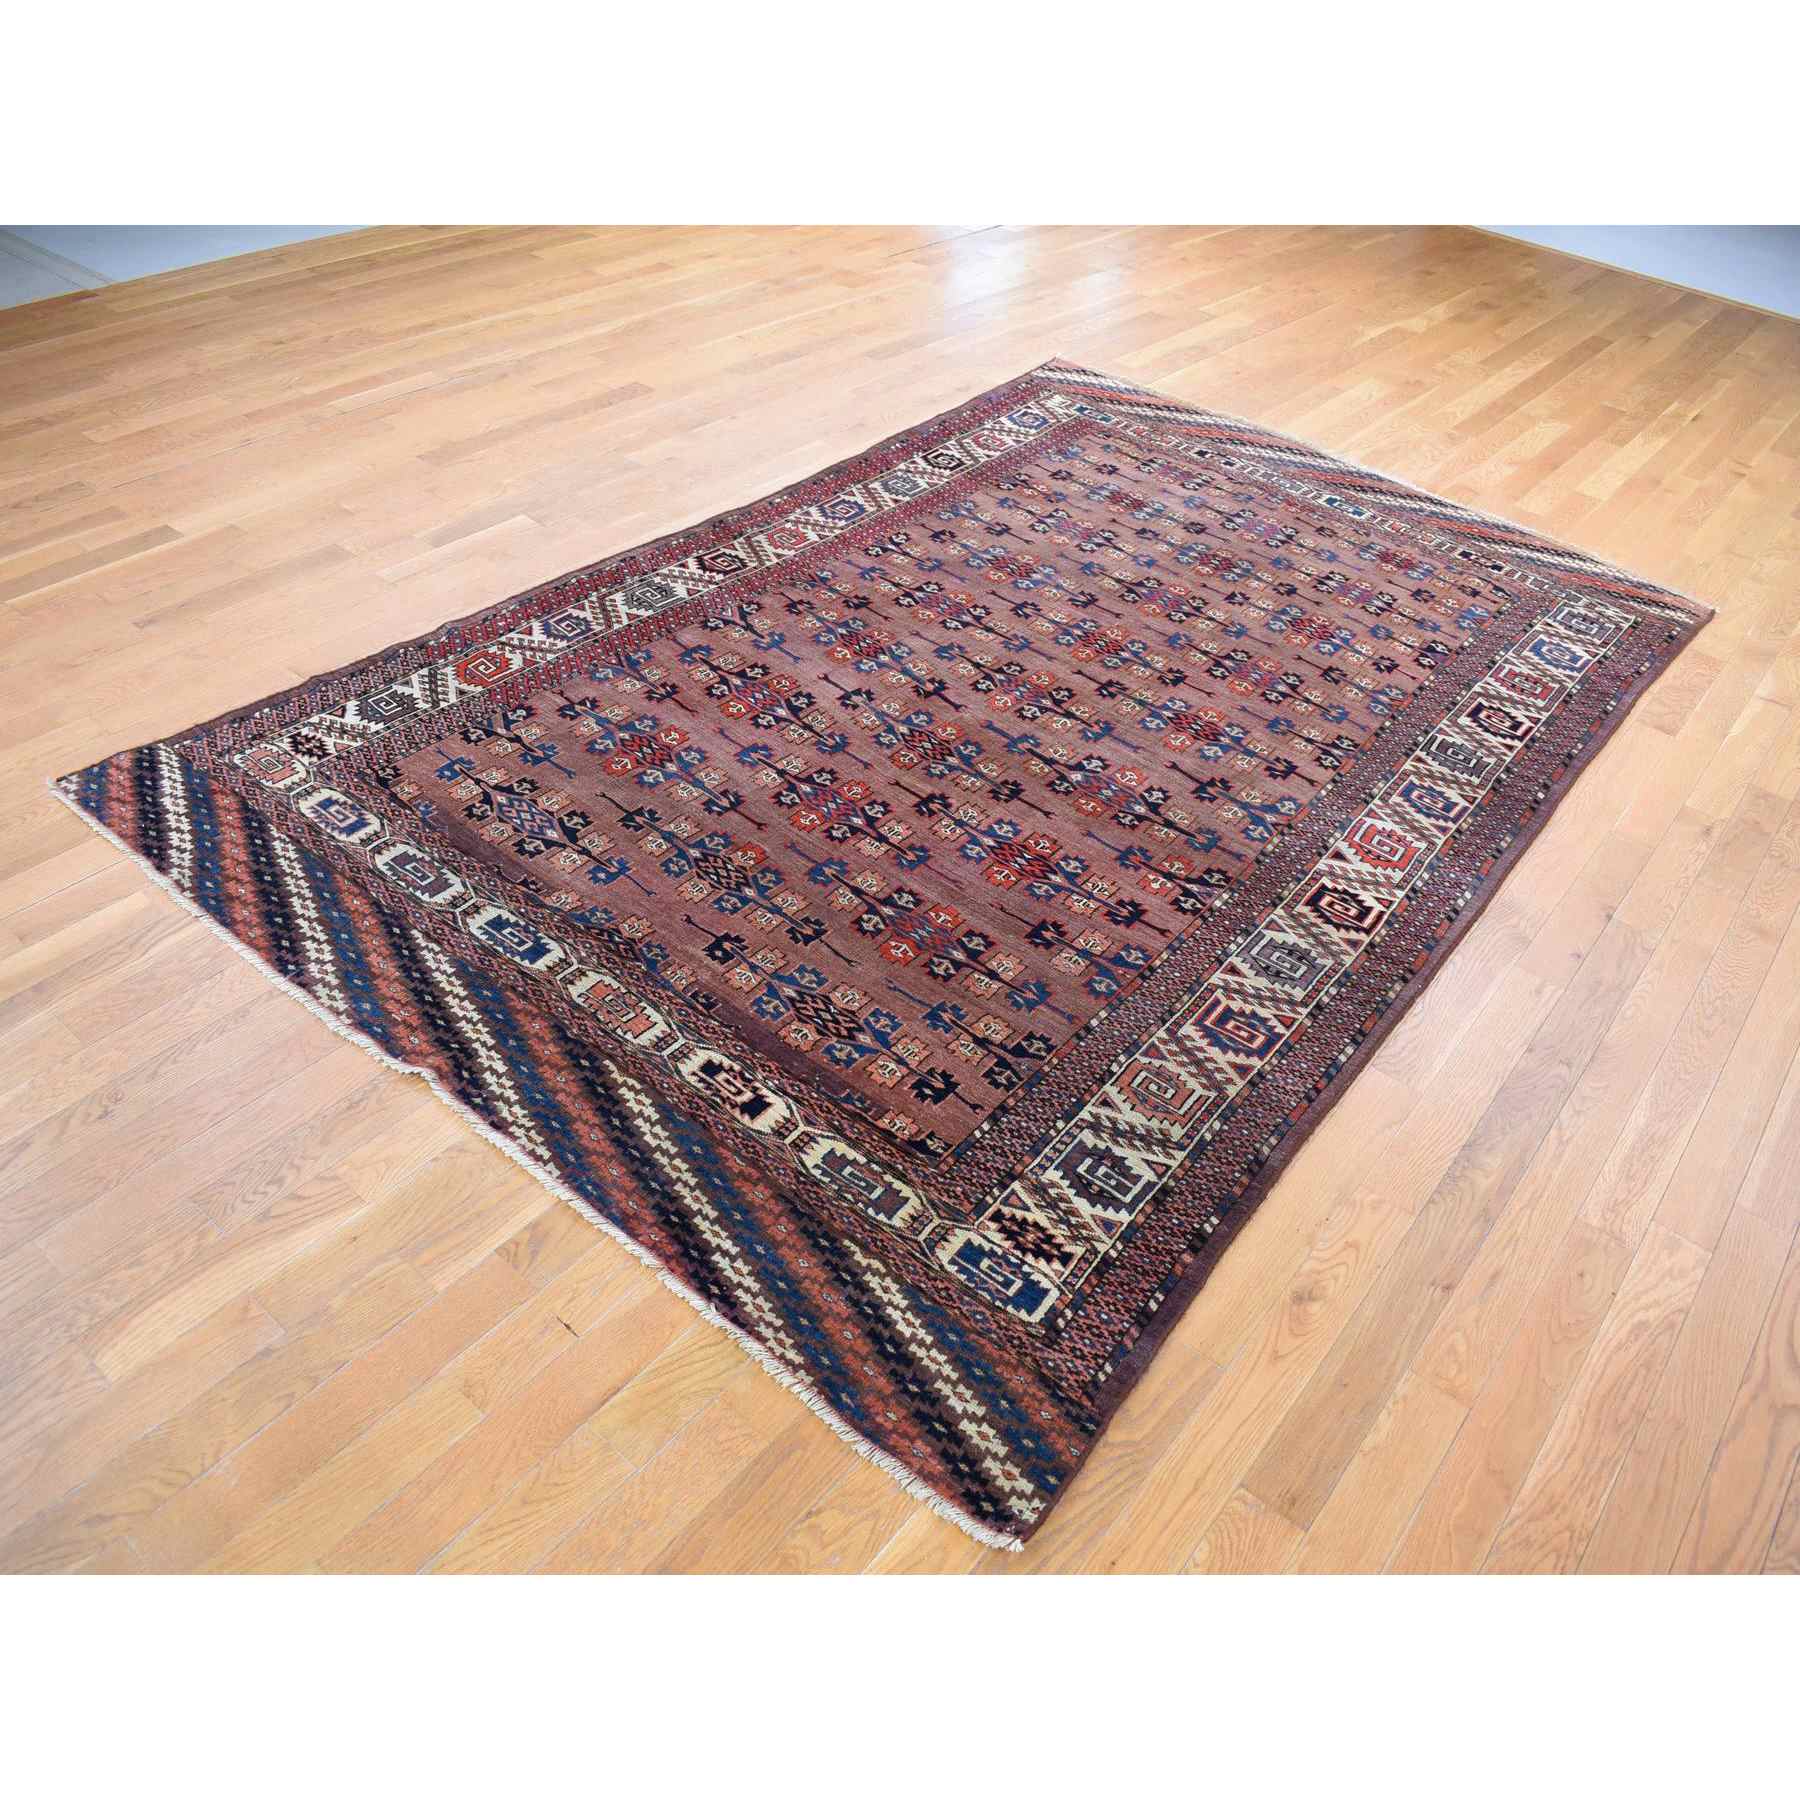 Antique-Hand-Knotted-Rug-401685